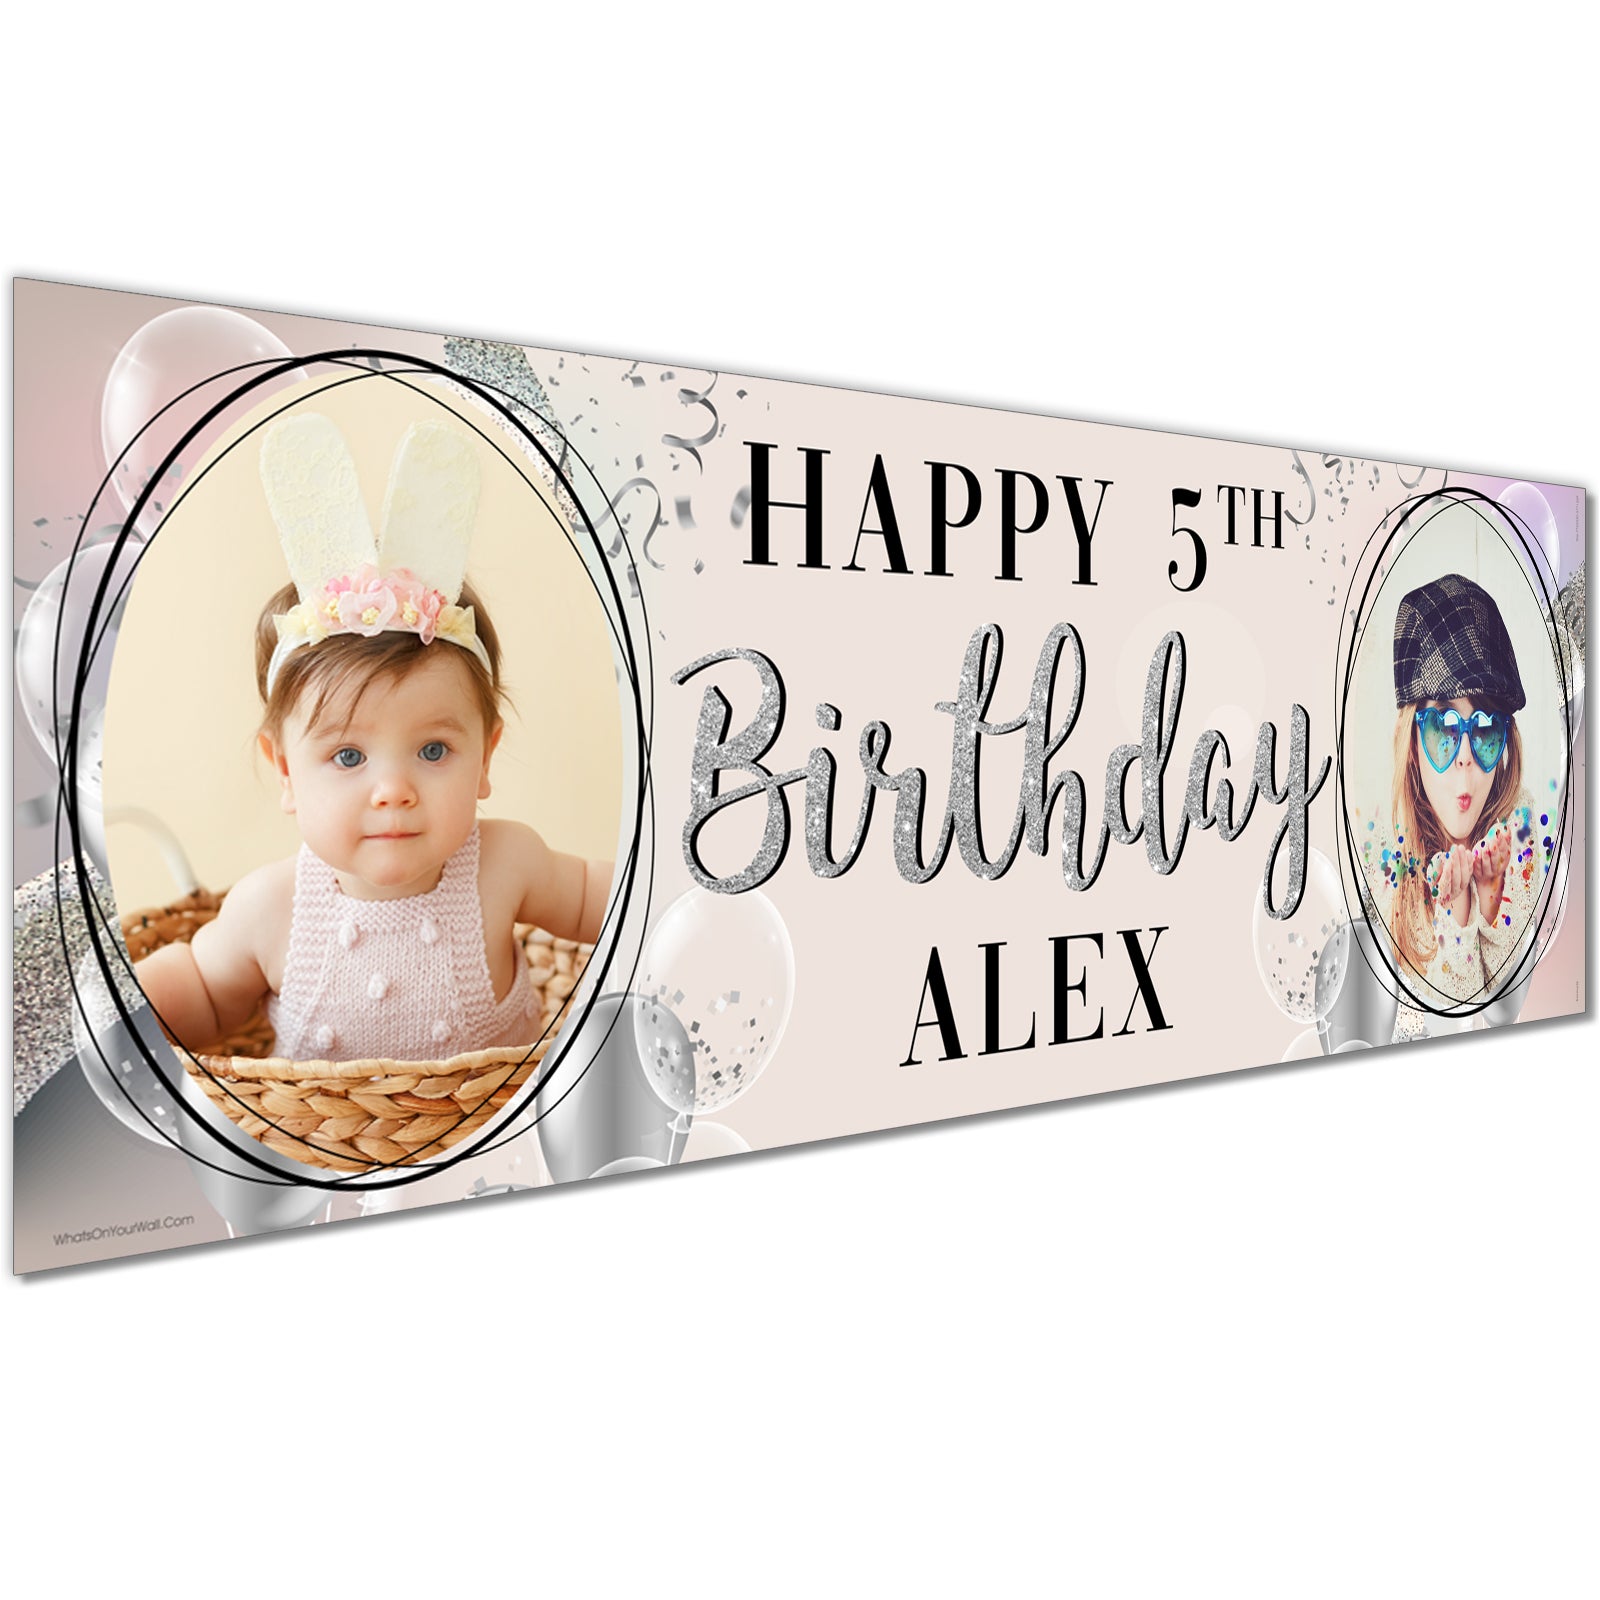 Personalised Birthday Banners Party Decorations in Grey Design